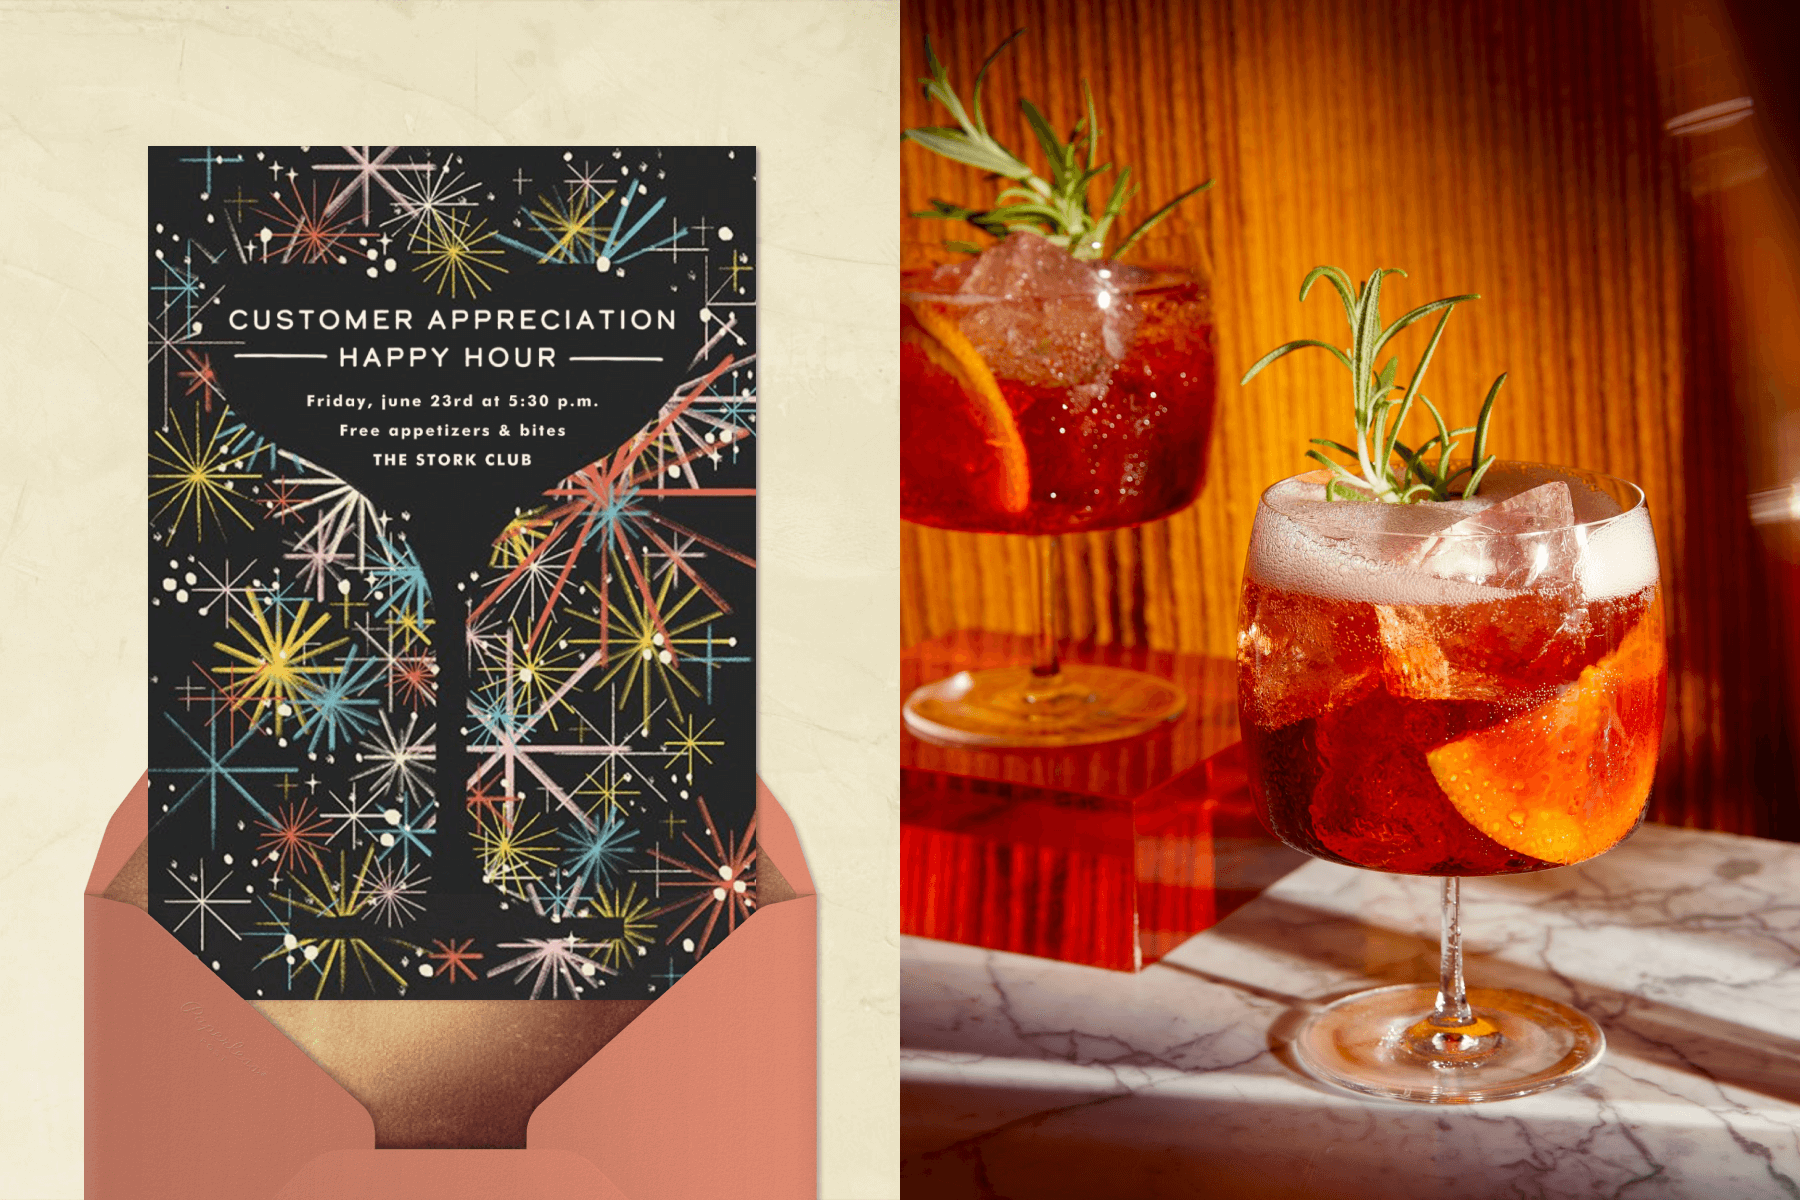 Left: A customer appreciation happy hour invitation with fireworks illustrations; Right: Two cocktails with elegant lighting.